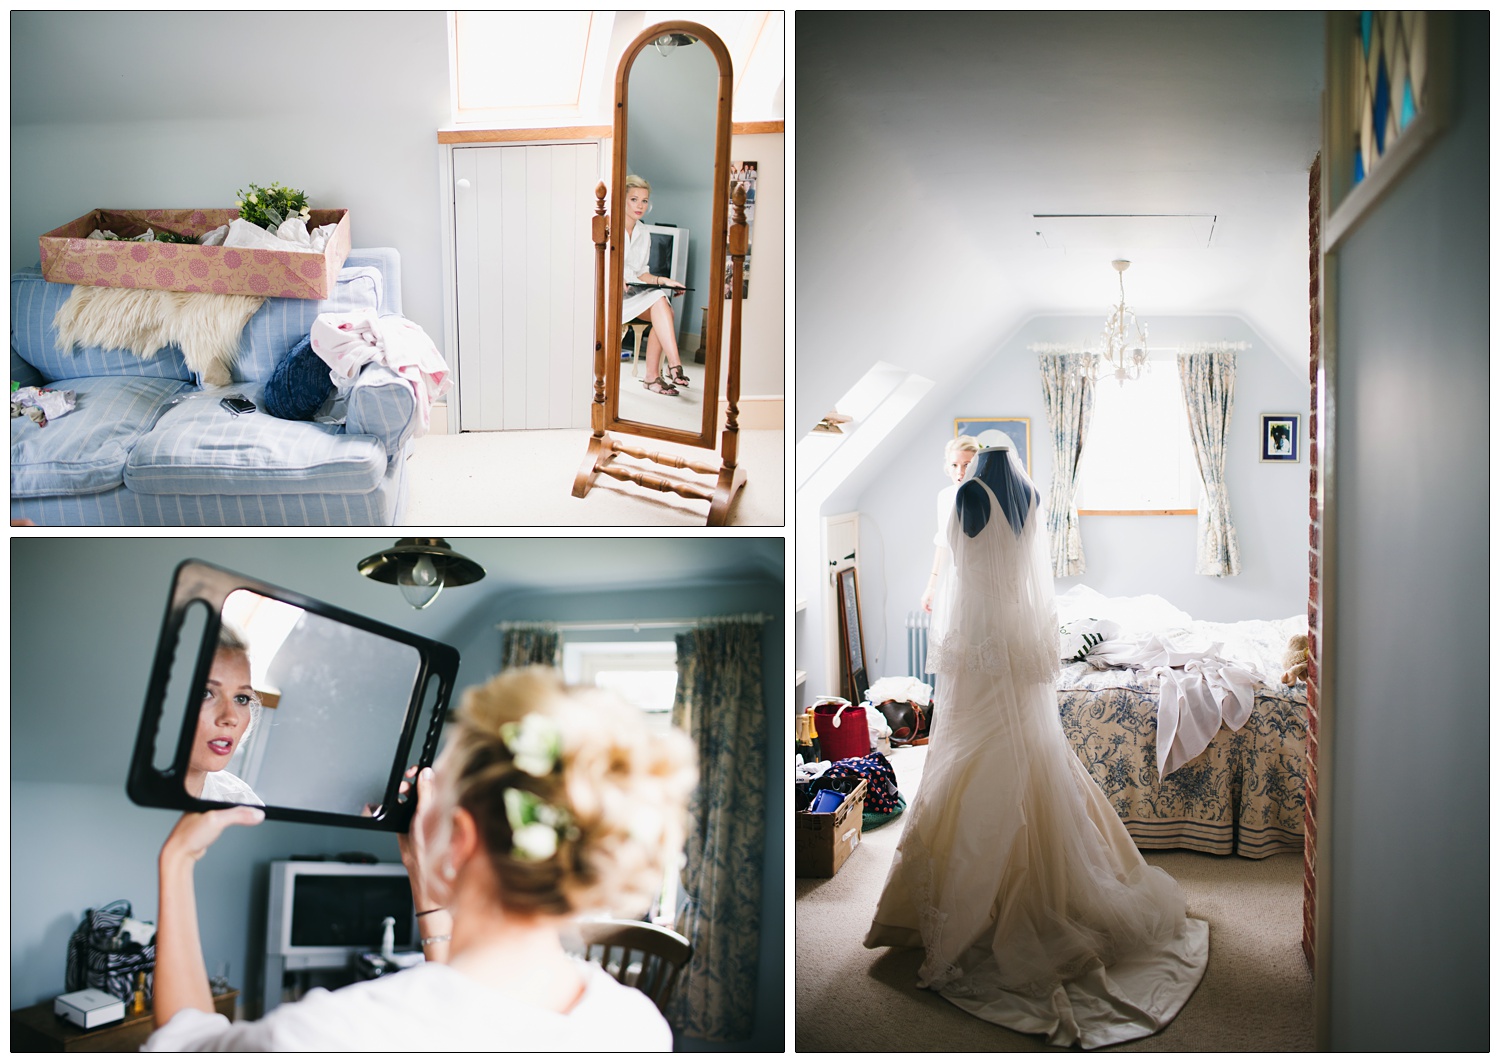 Bride looking at her makeup in the mirror. Her wedding dress is on a mannequin in a bedroom.